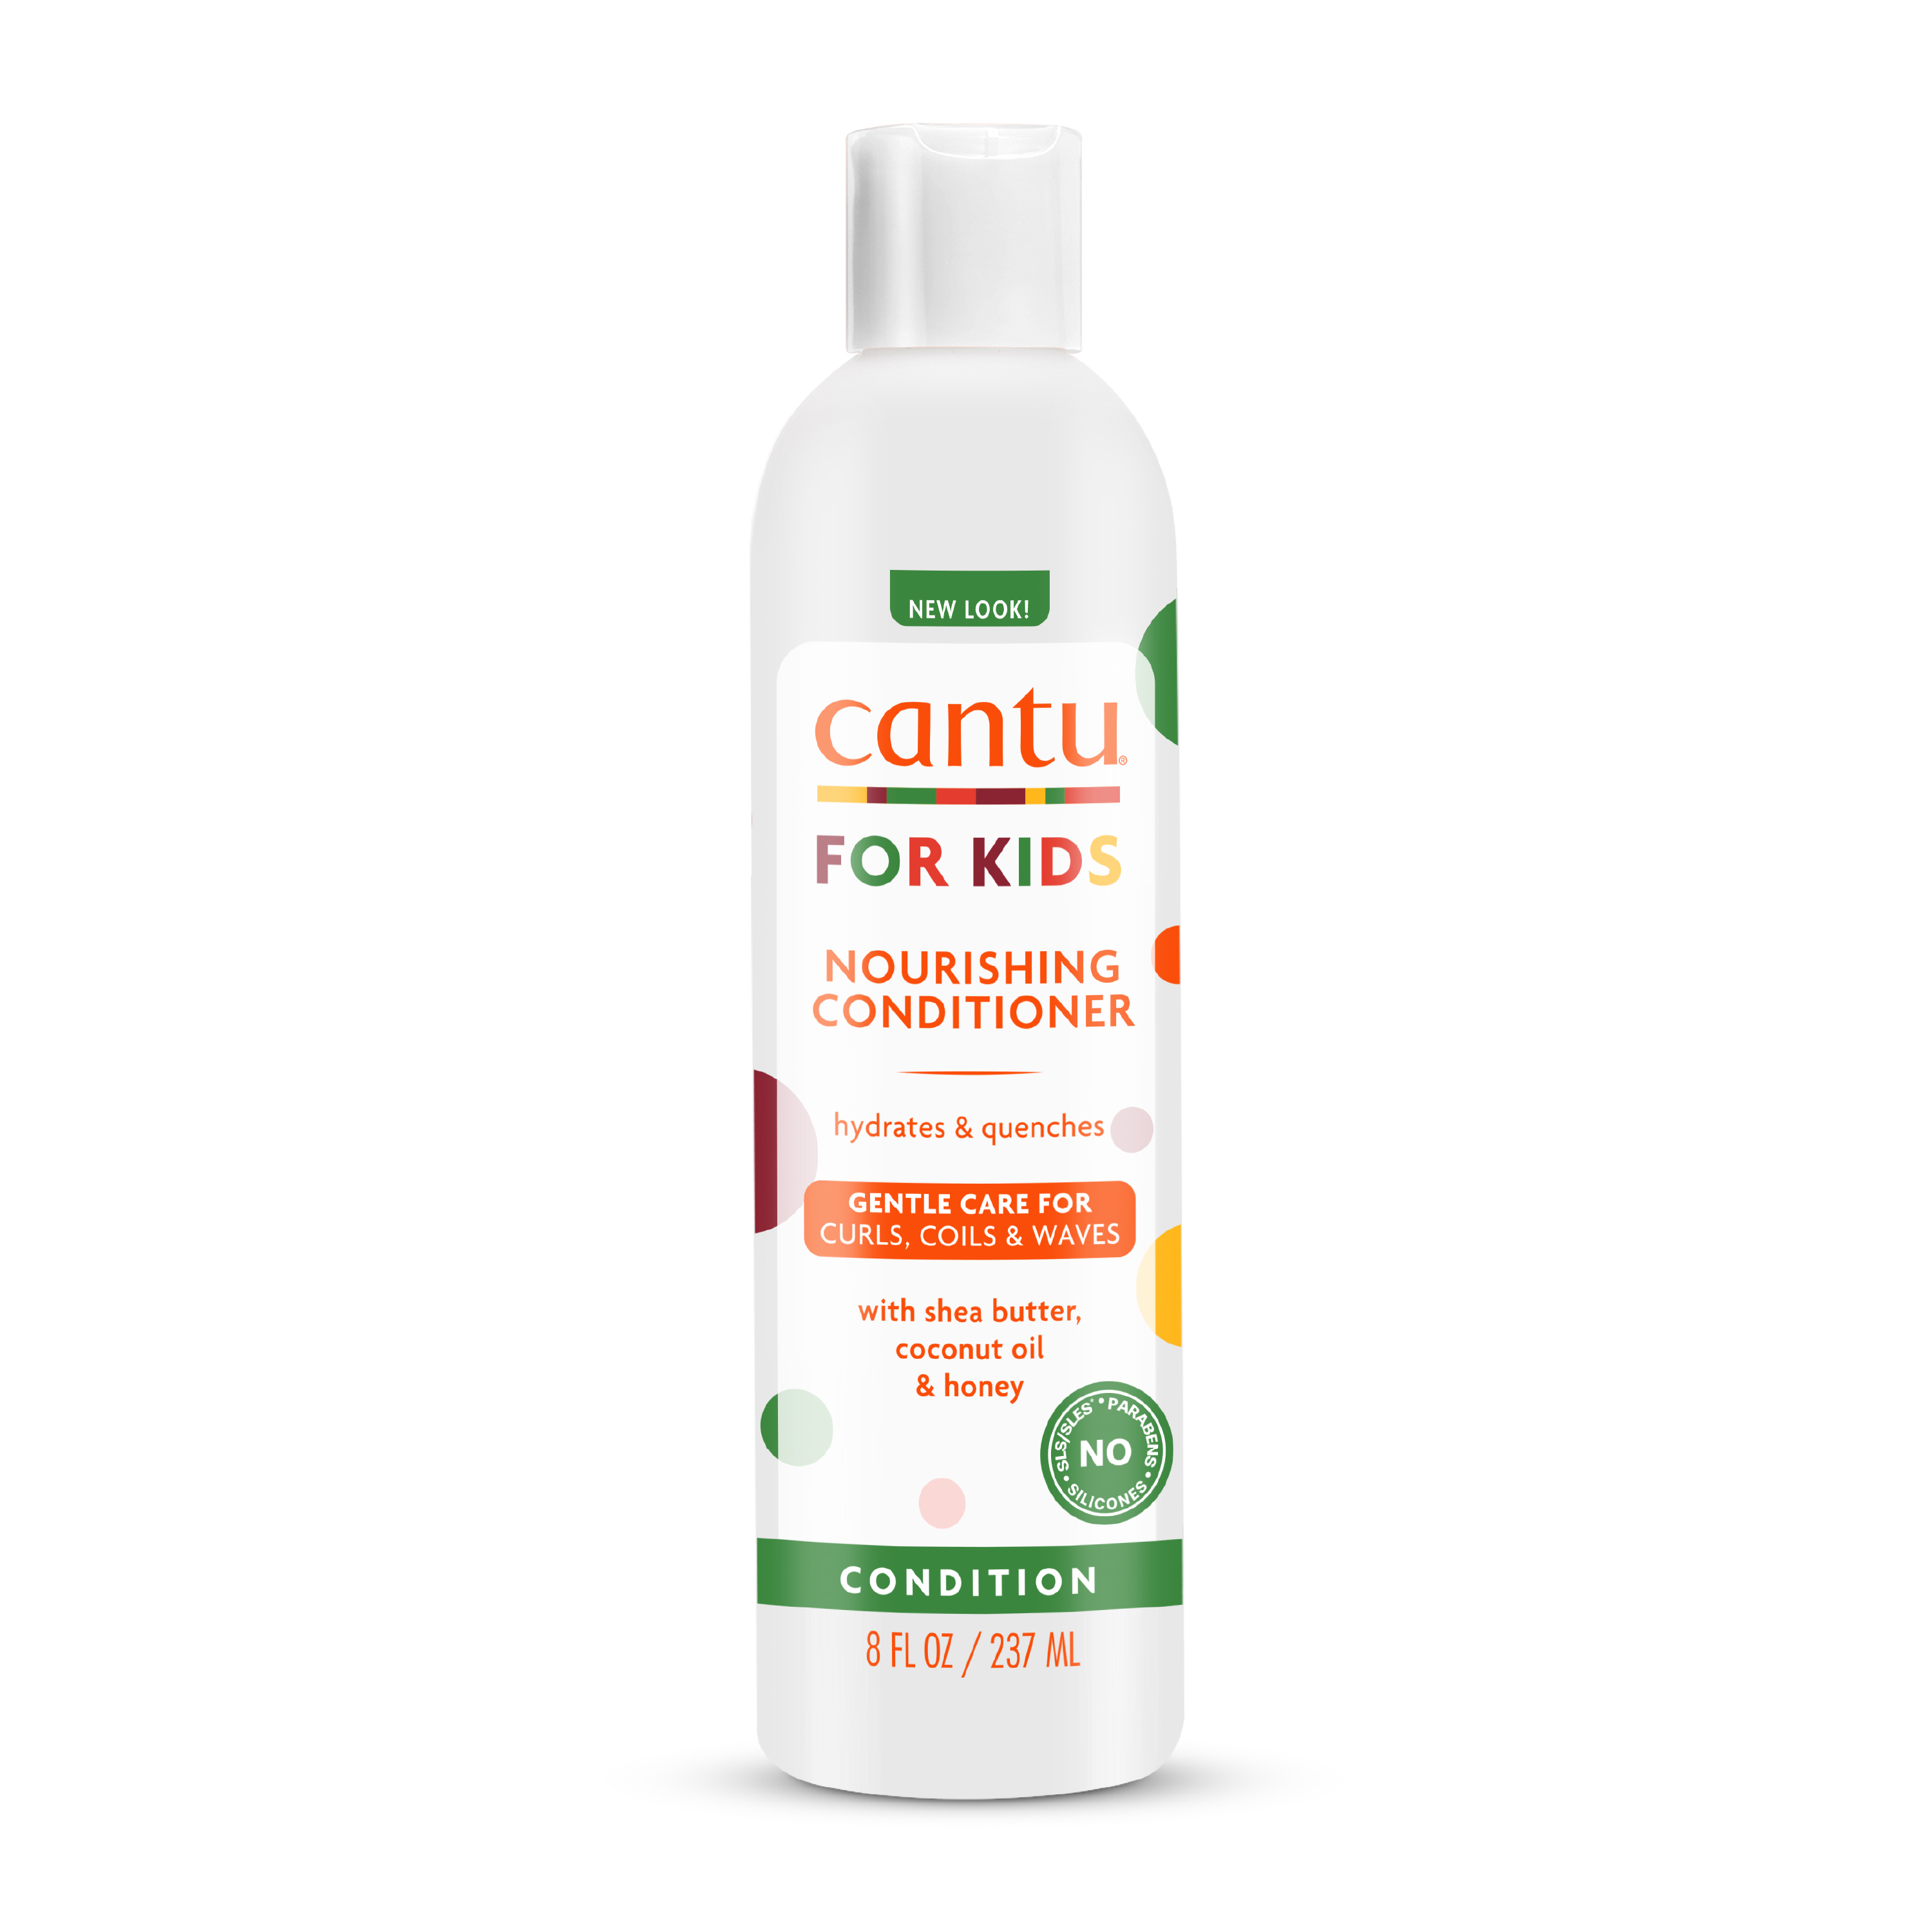 Cantu Care for Kids Nourishing Sulfate-Free Conditioner with Shea Butter, 8 fl oz - image 1 of 11